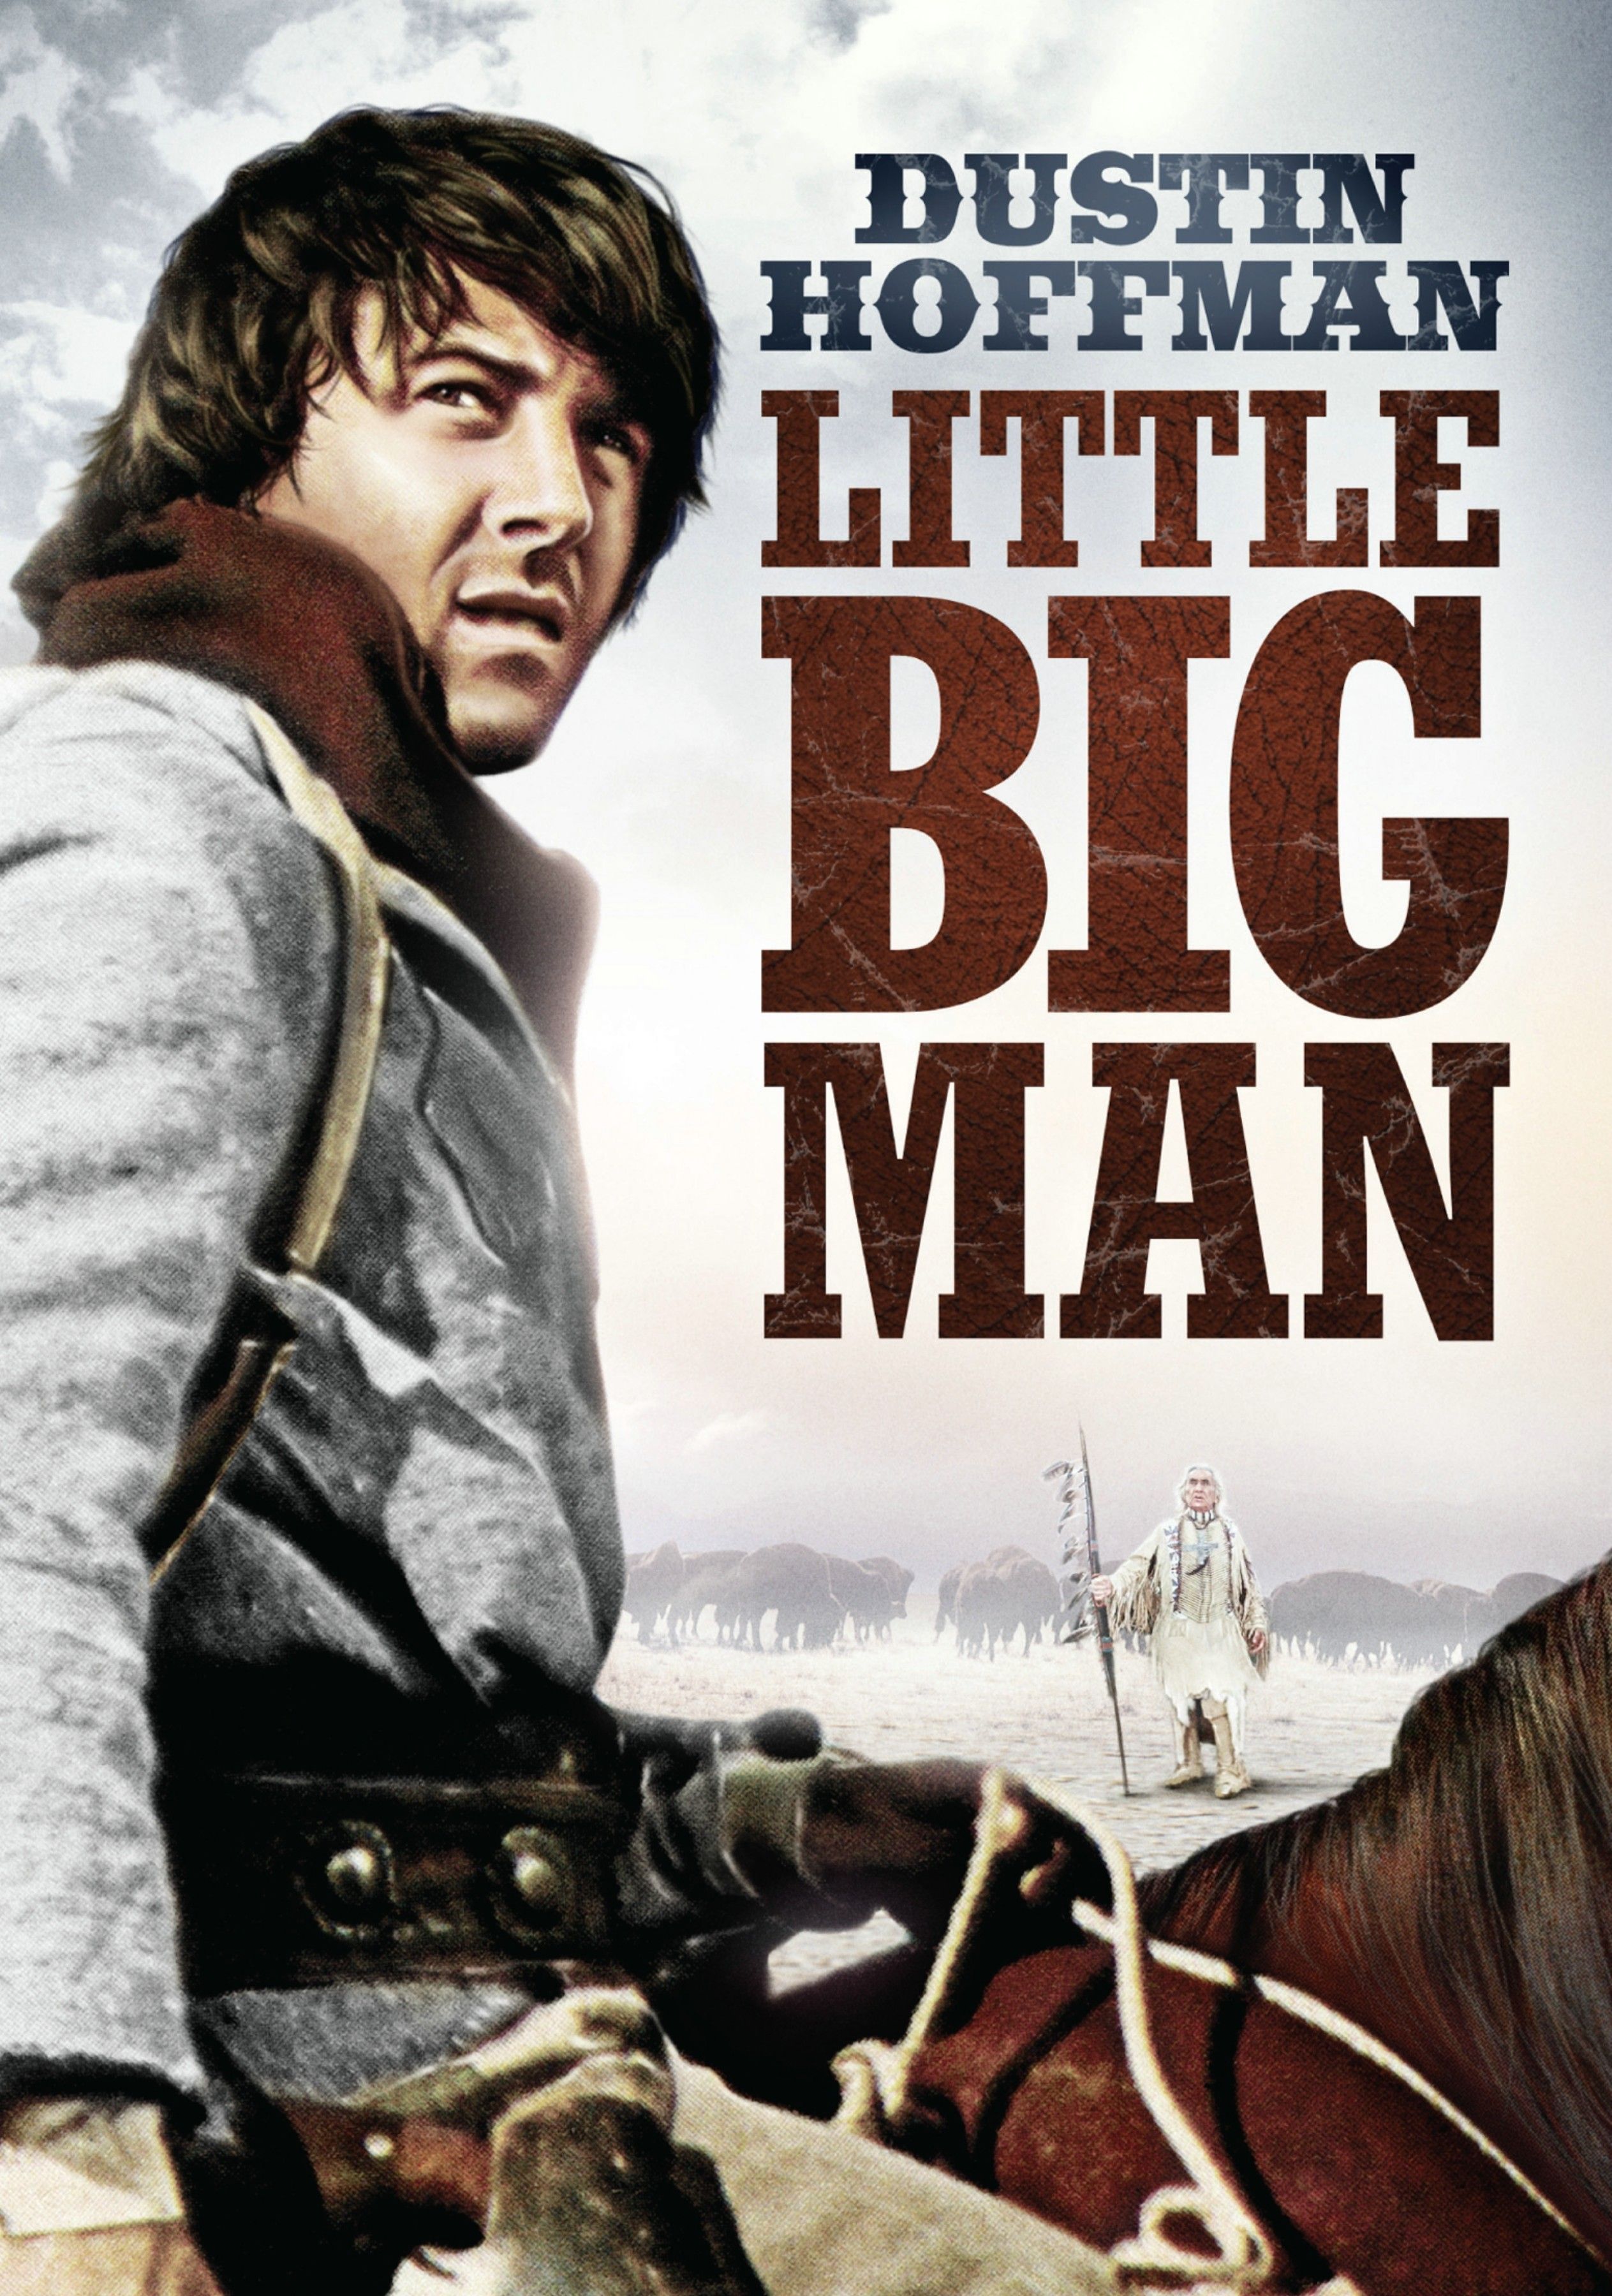 Dustin Hoffman as Jack Crabb in the Little Big Man movie poster